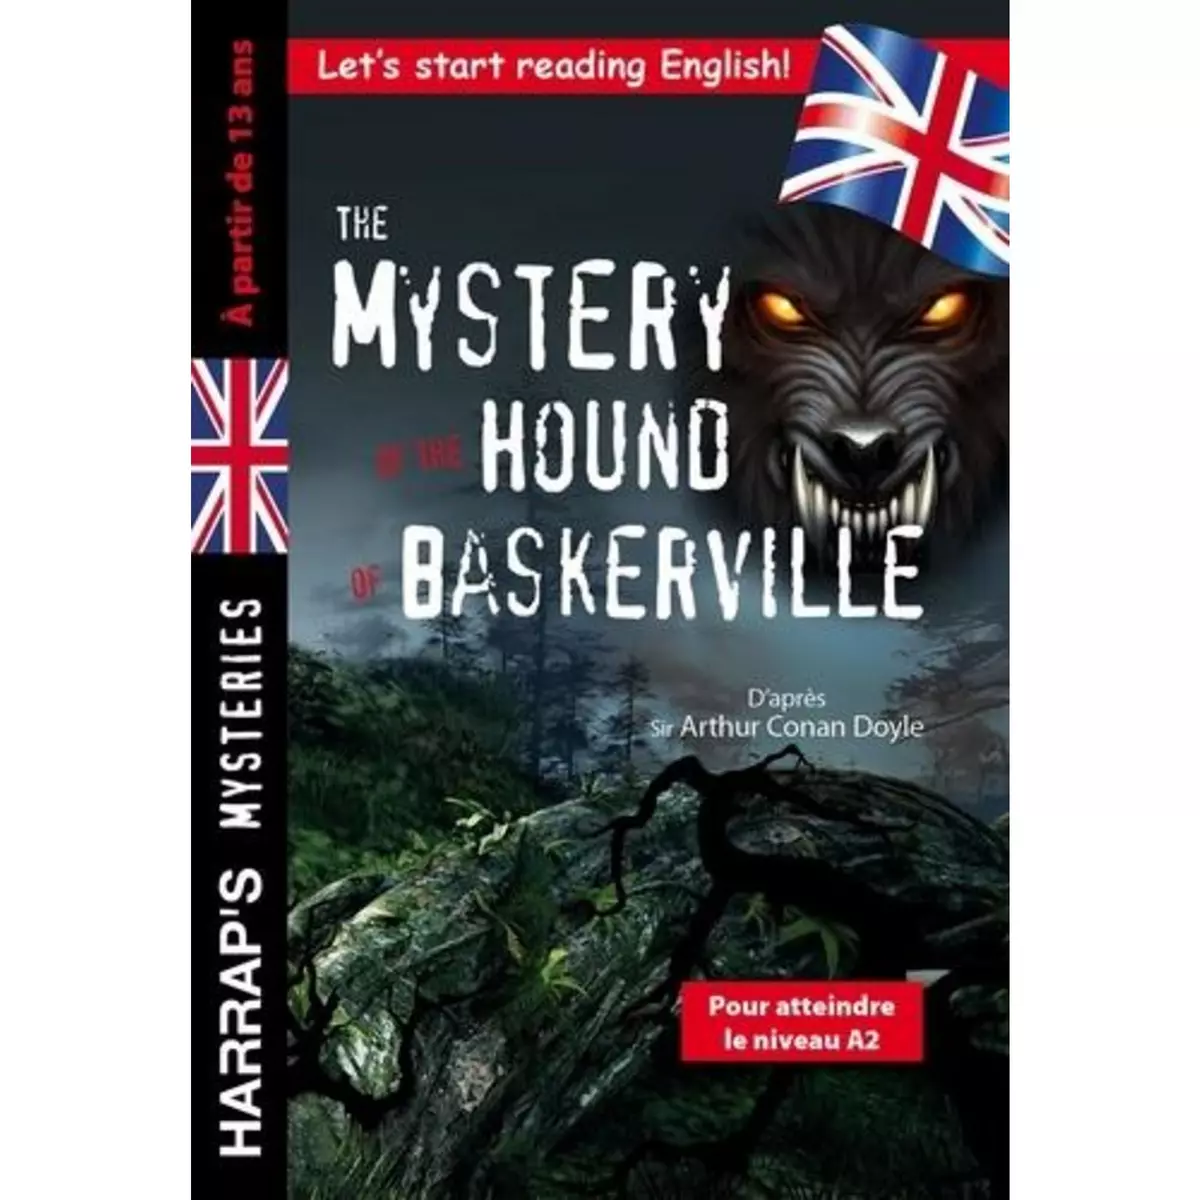  THE MYSTERY OF THE HOUND OF BASKERVILLE. POUR ATTEINDRE LE NIVEAU A2, Harrap